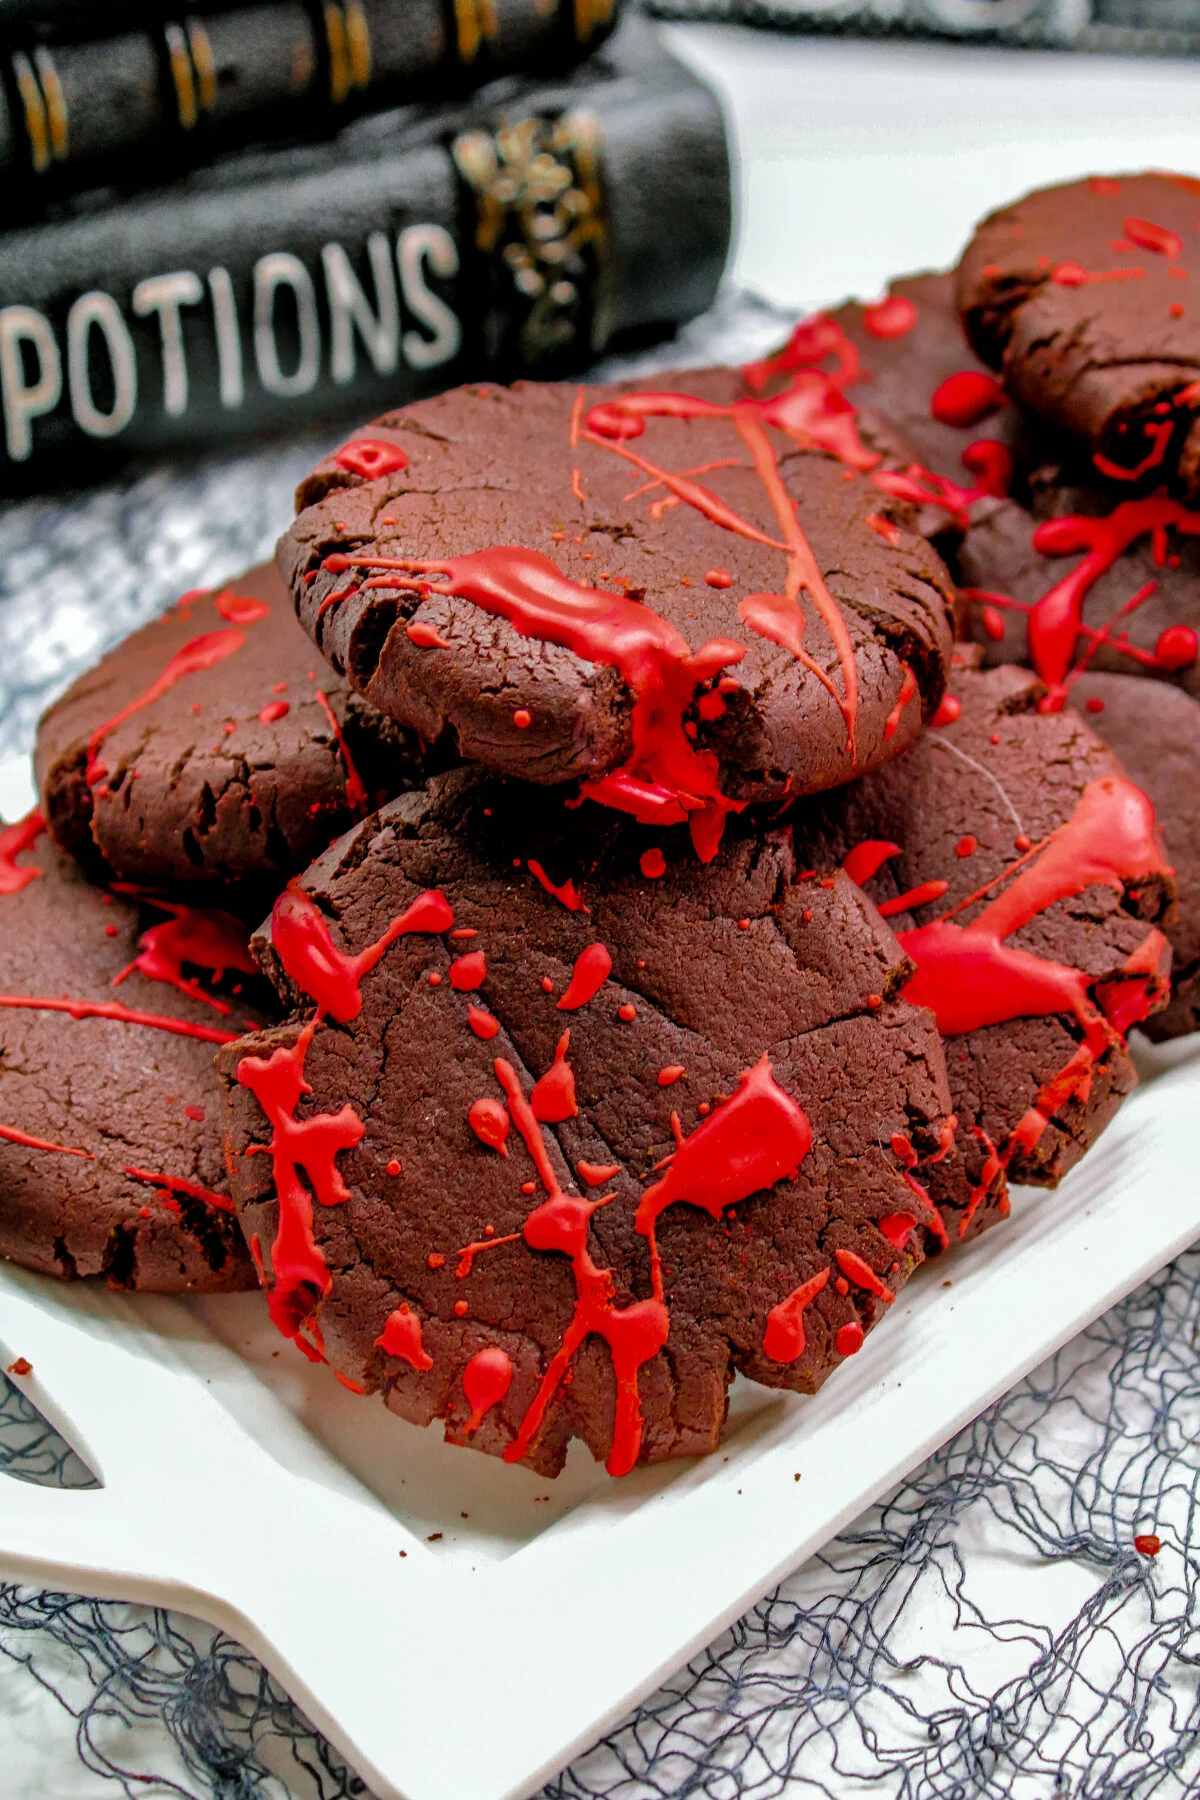 These creepy blood splatter cookies are perfect for your next Halloween party! They're easy to make and will definitely spook your guests.